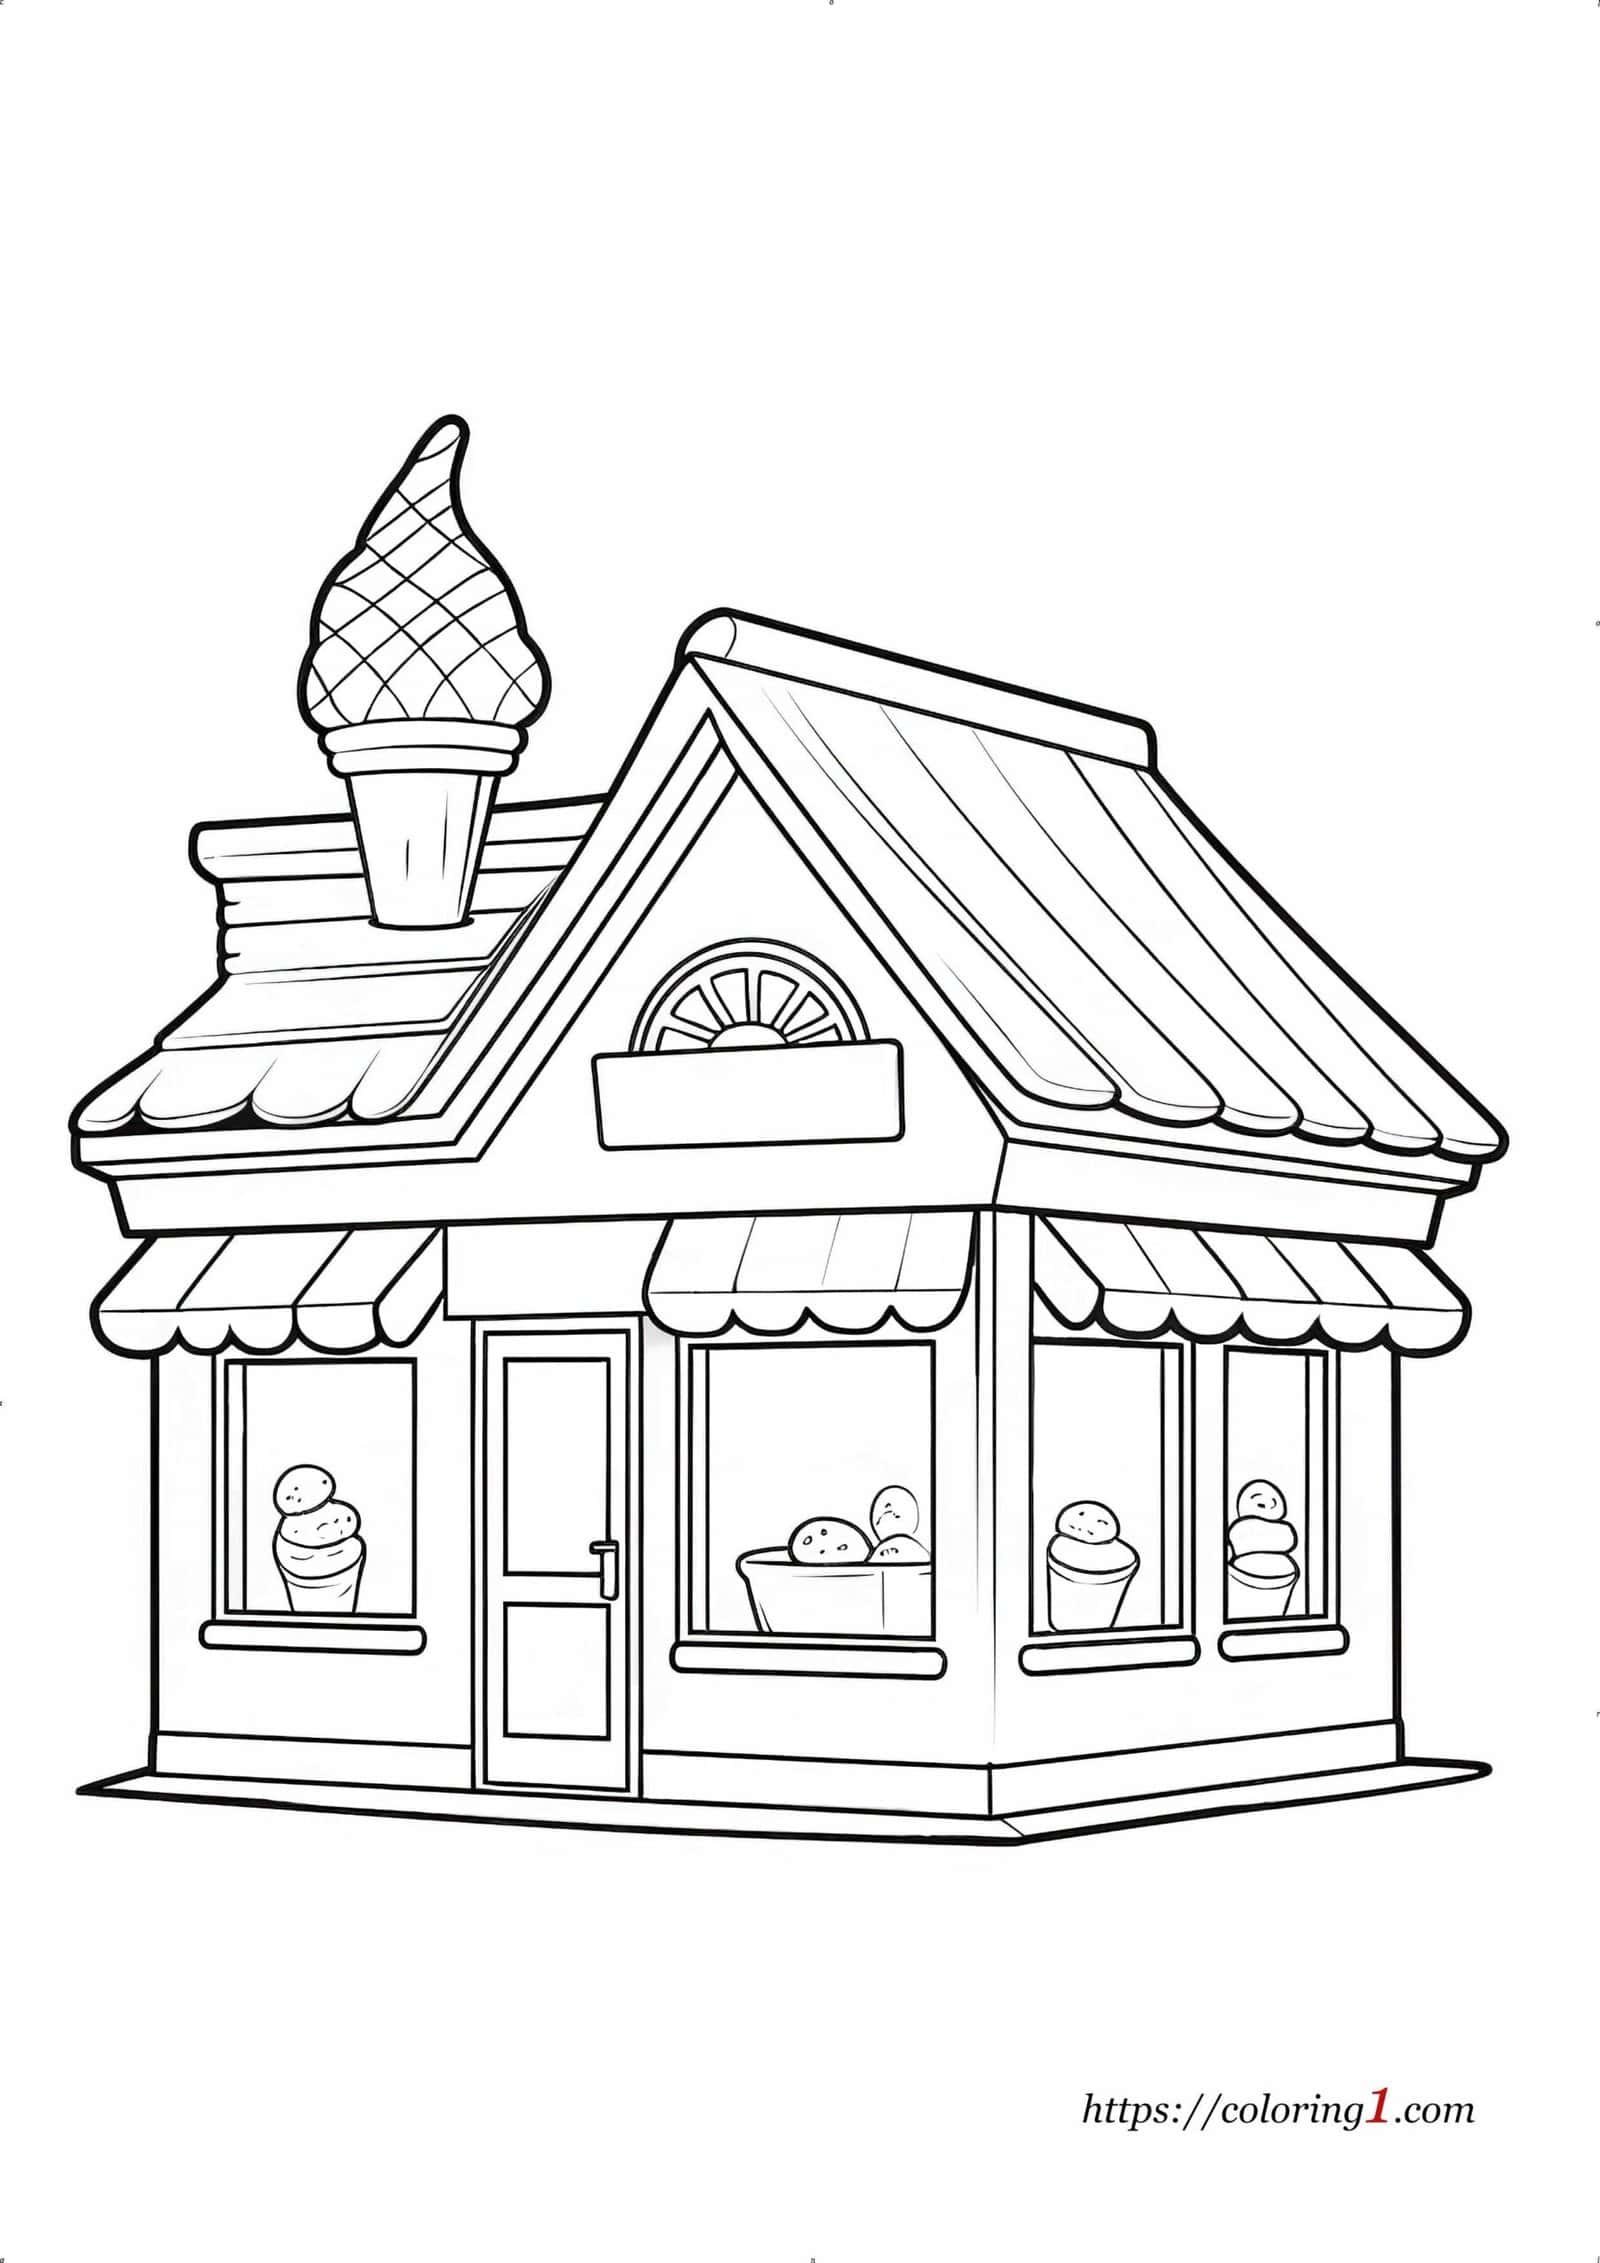 Ice Cream Shop coloring page black and white